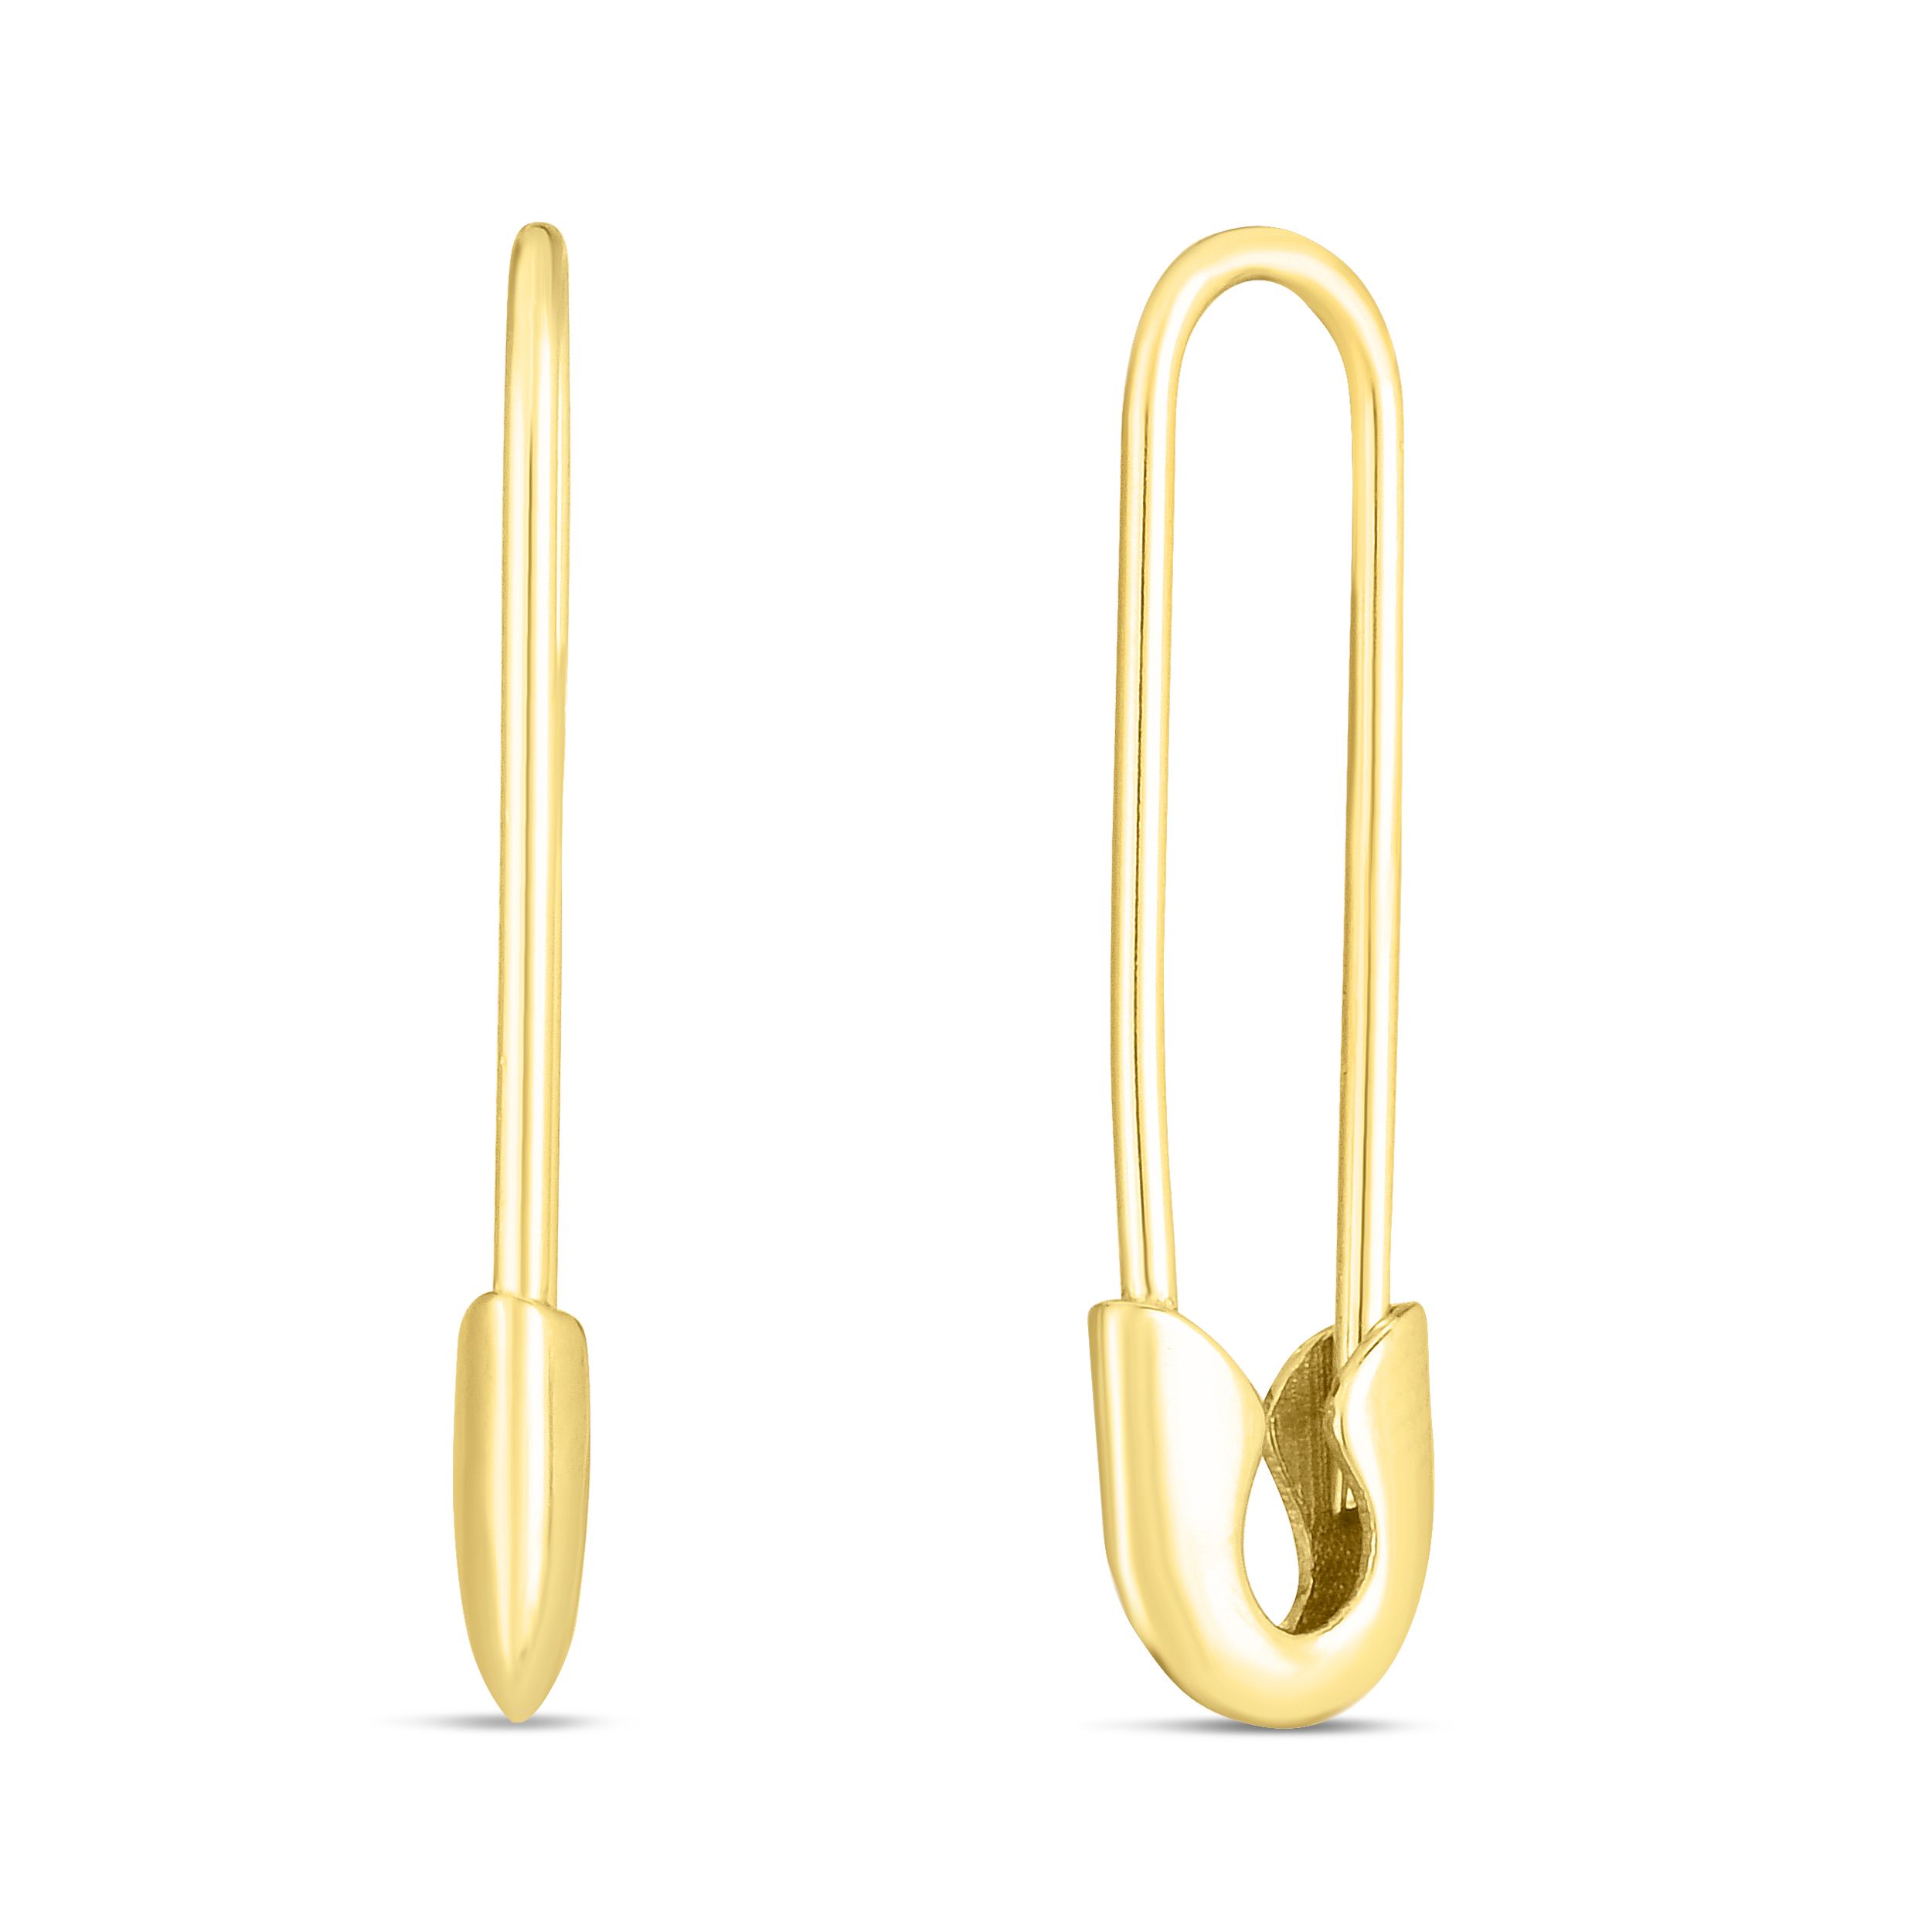 14K YELLOW GOLD LARGE SAFETY PIN EARRINGS | Patty Q's Jewelry Inc